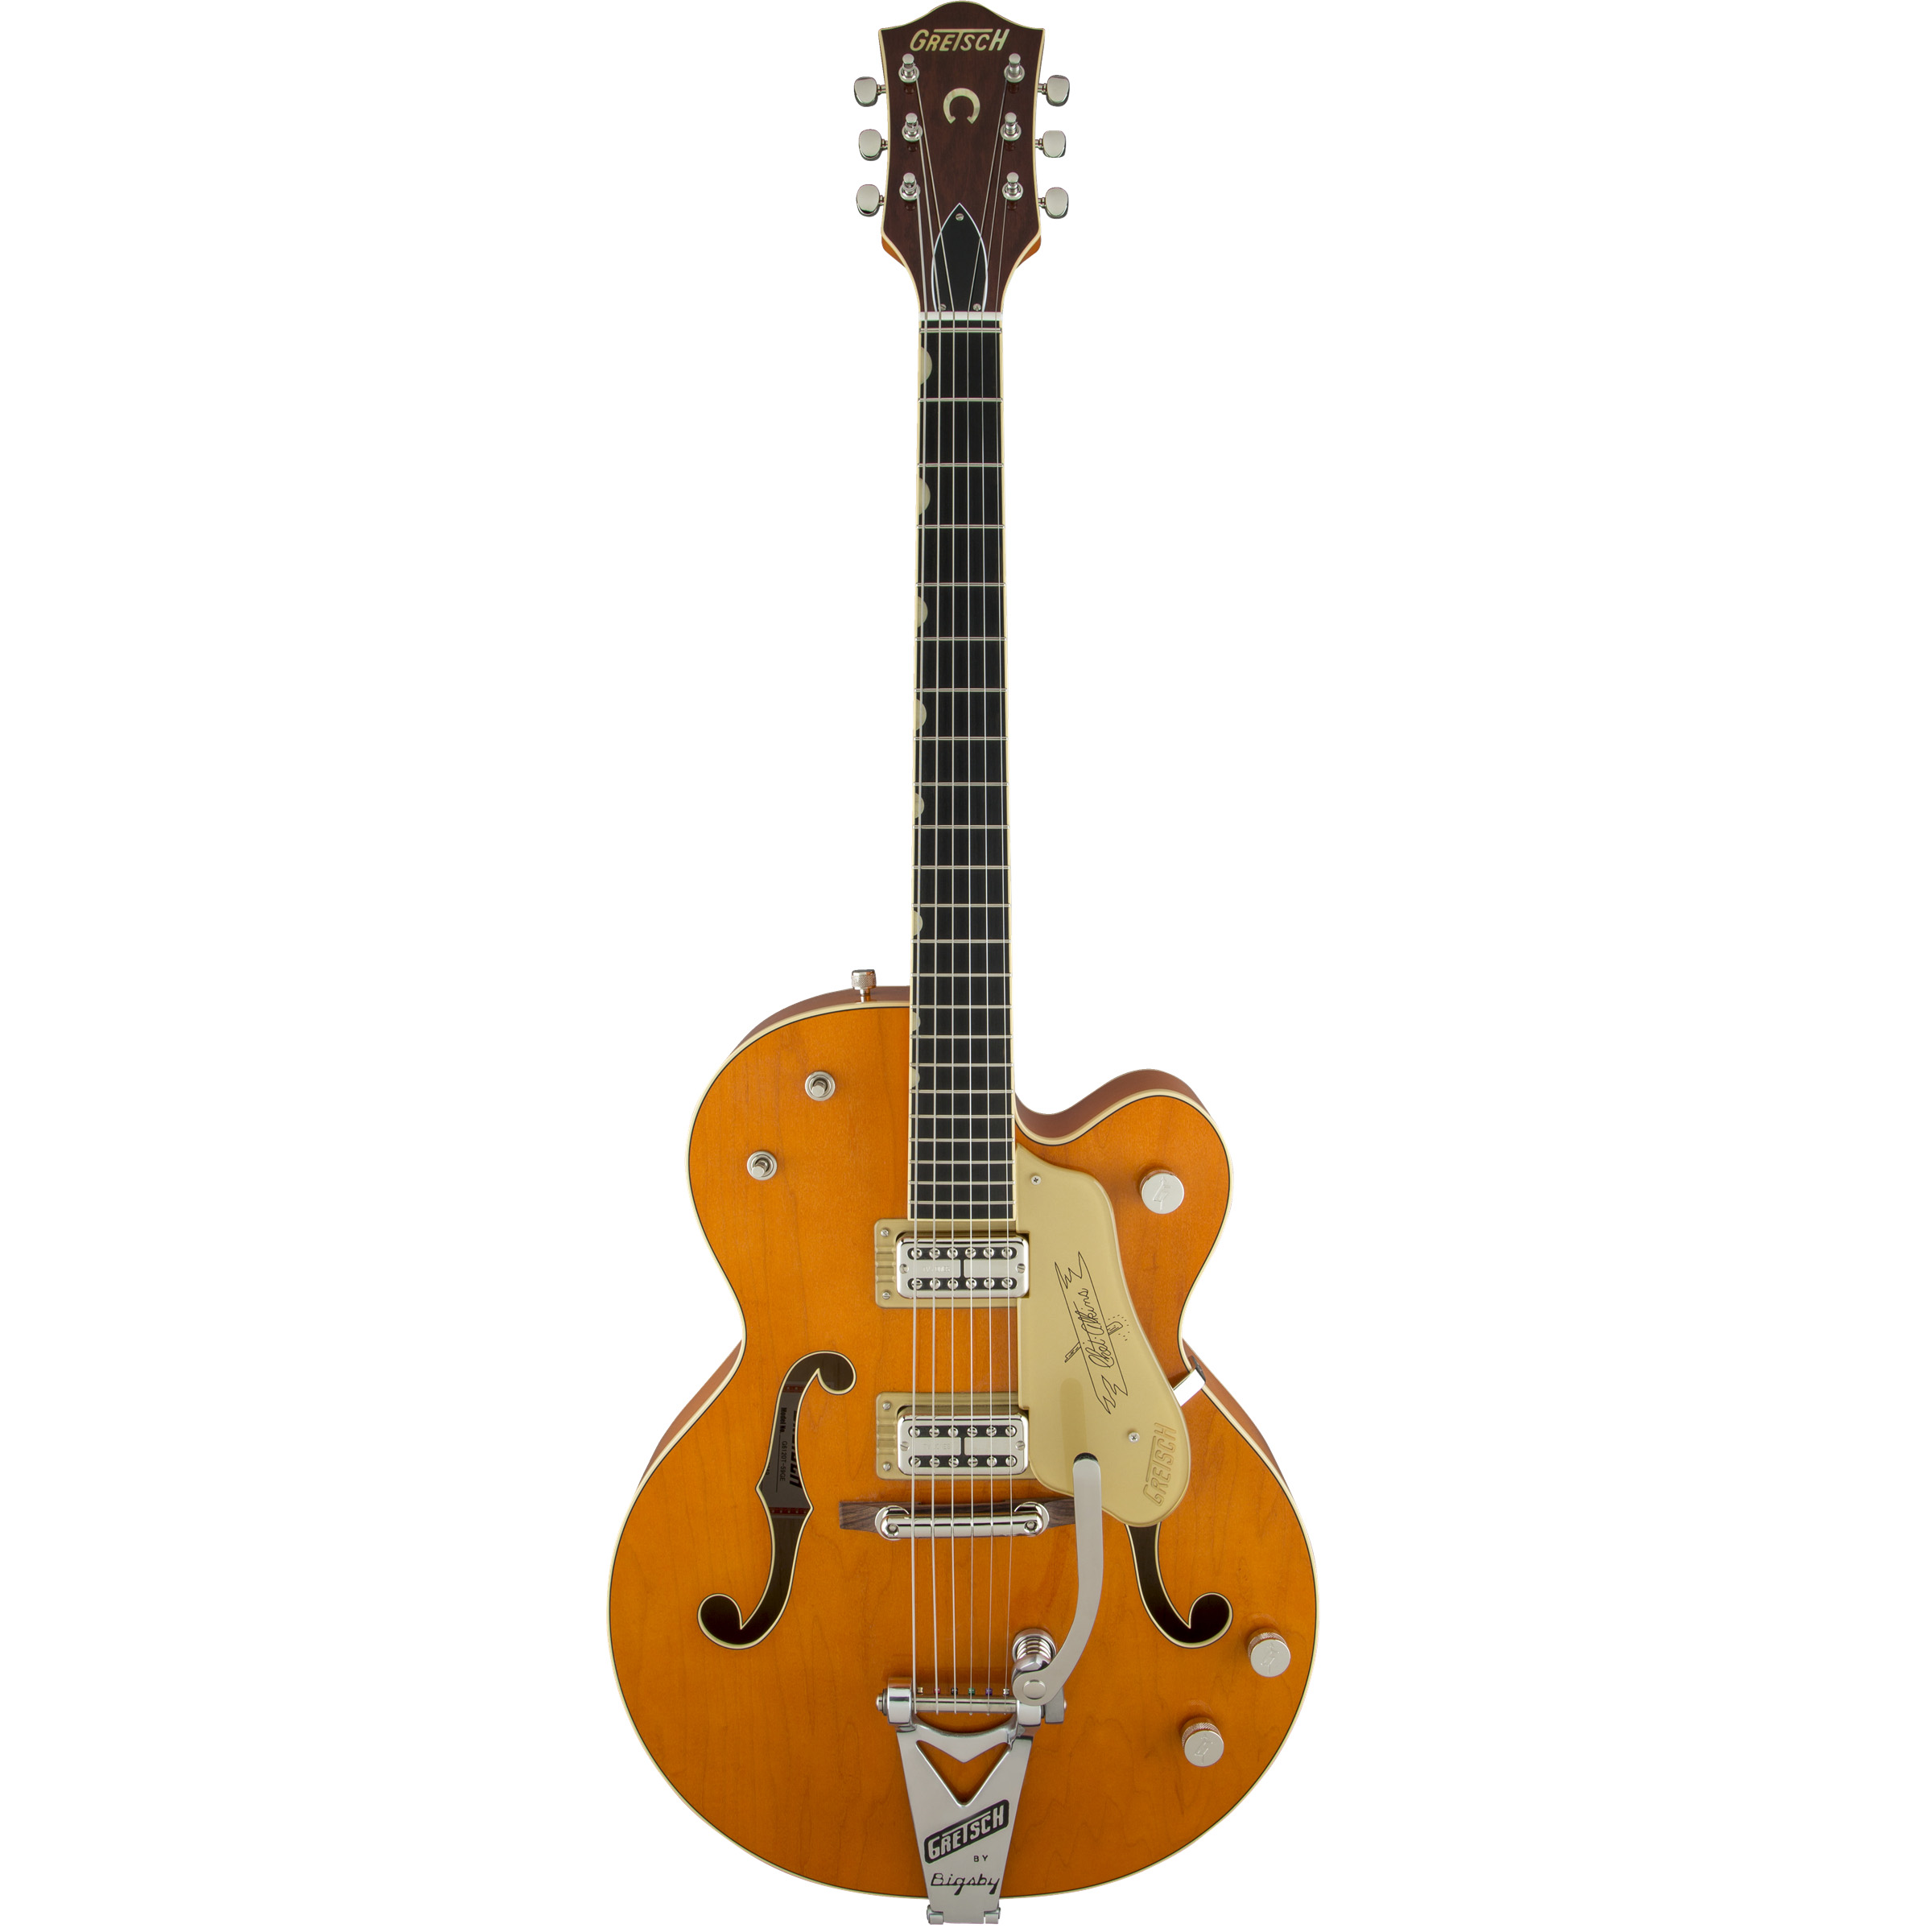 Gretsch G6120T-59 Vintage Select Edition 59 Chet Atkins® Hollow Body with Bigsby®, TV Jones®, Vintage Orange Stain Lacquer Электрогитары